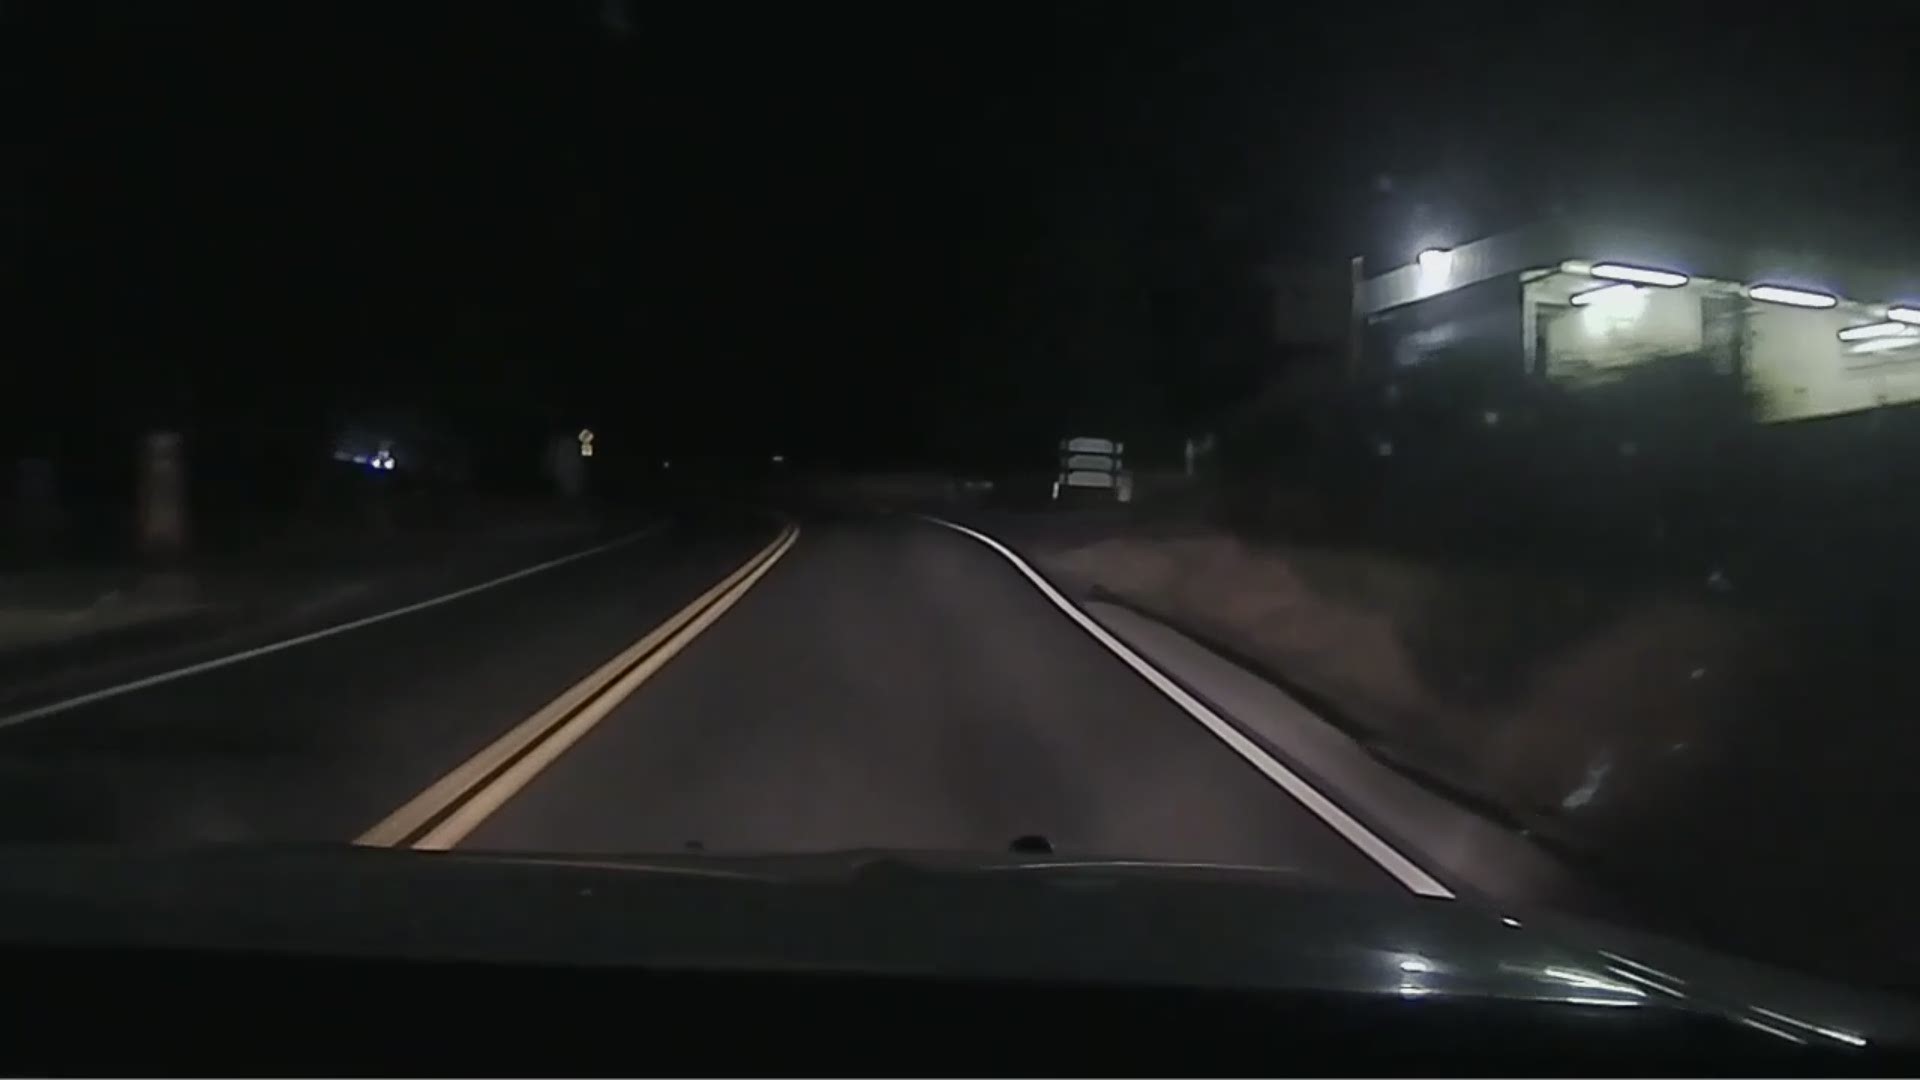 An Amador County Sheriff's deputy had to think fast to avoid a suspected drunk driver barreling towards his cruiser.